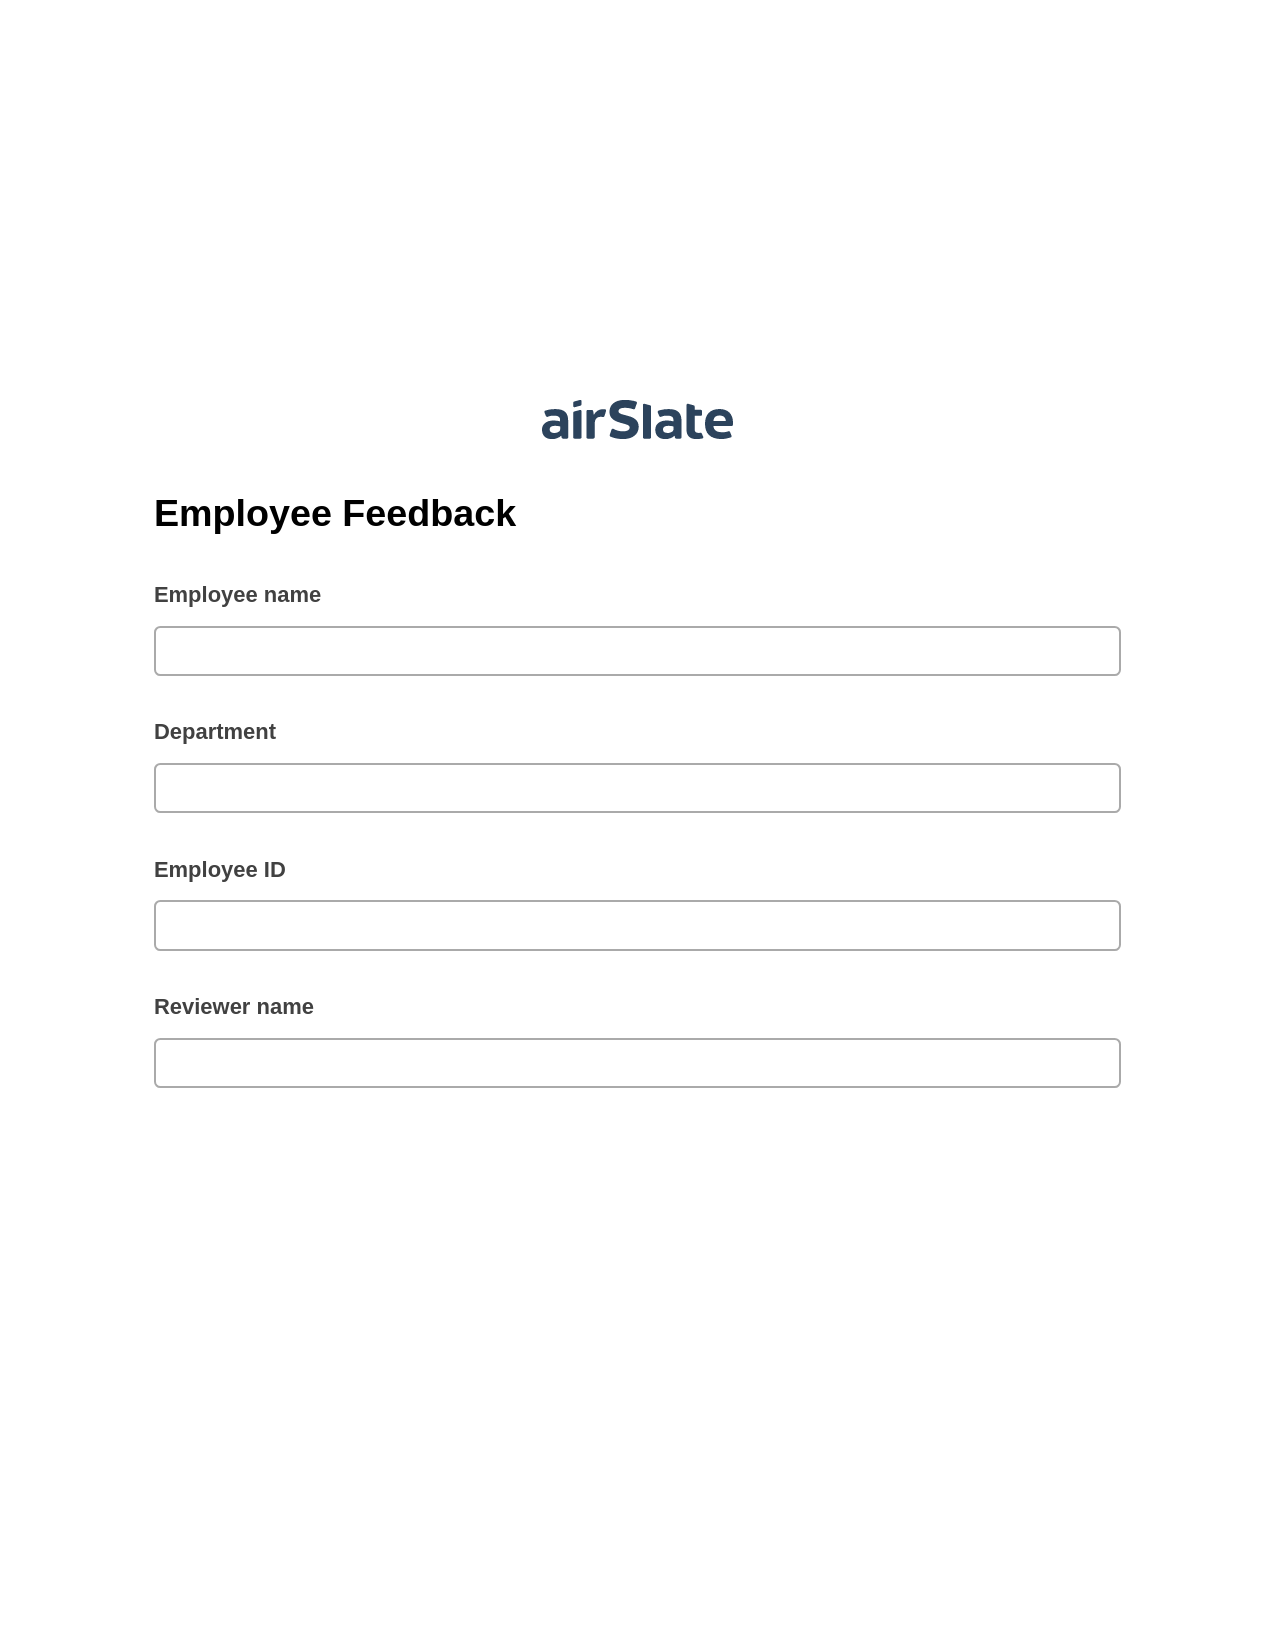 Employee Feedback Pre-fill from Google Sheet Dropdown Options Bot, System Bot - Create a Slate in another Flow, Export to MySQL Bot